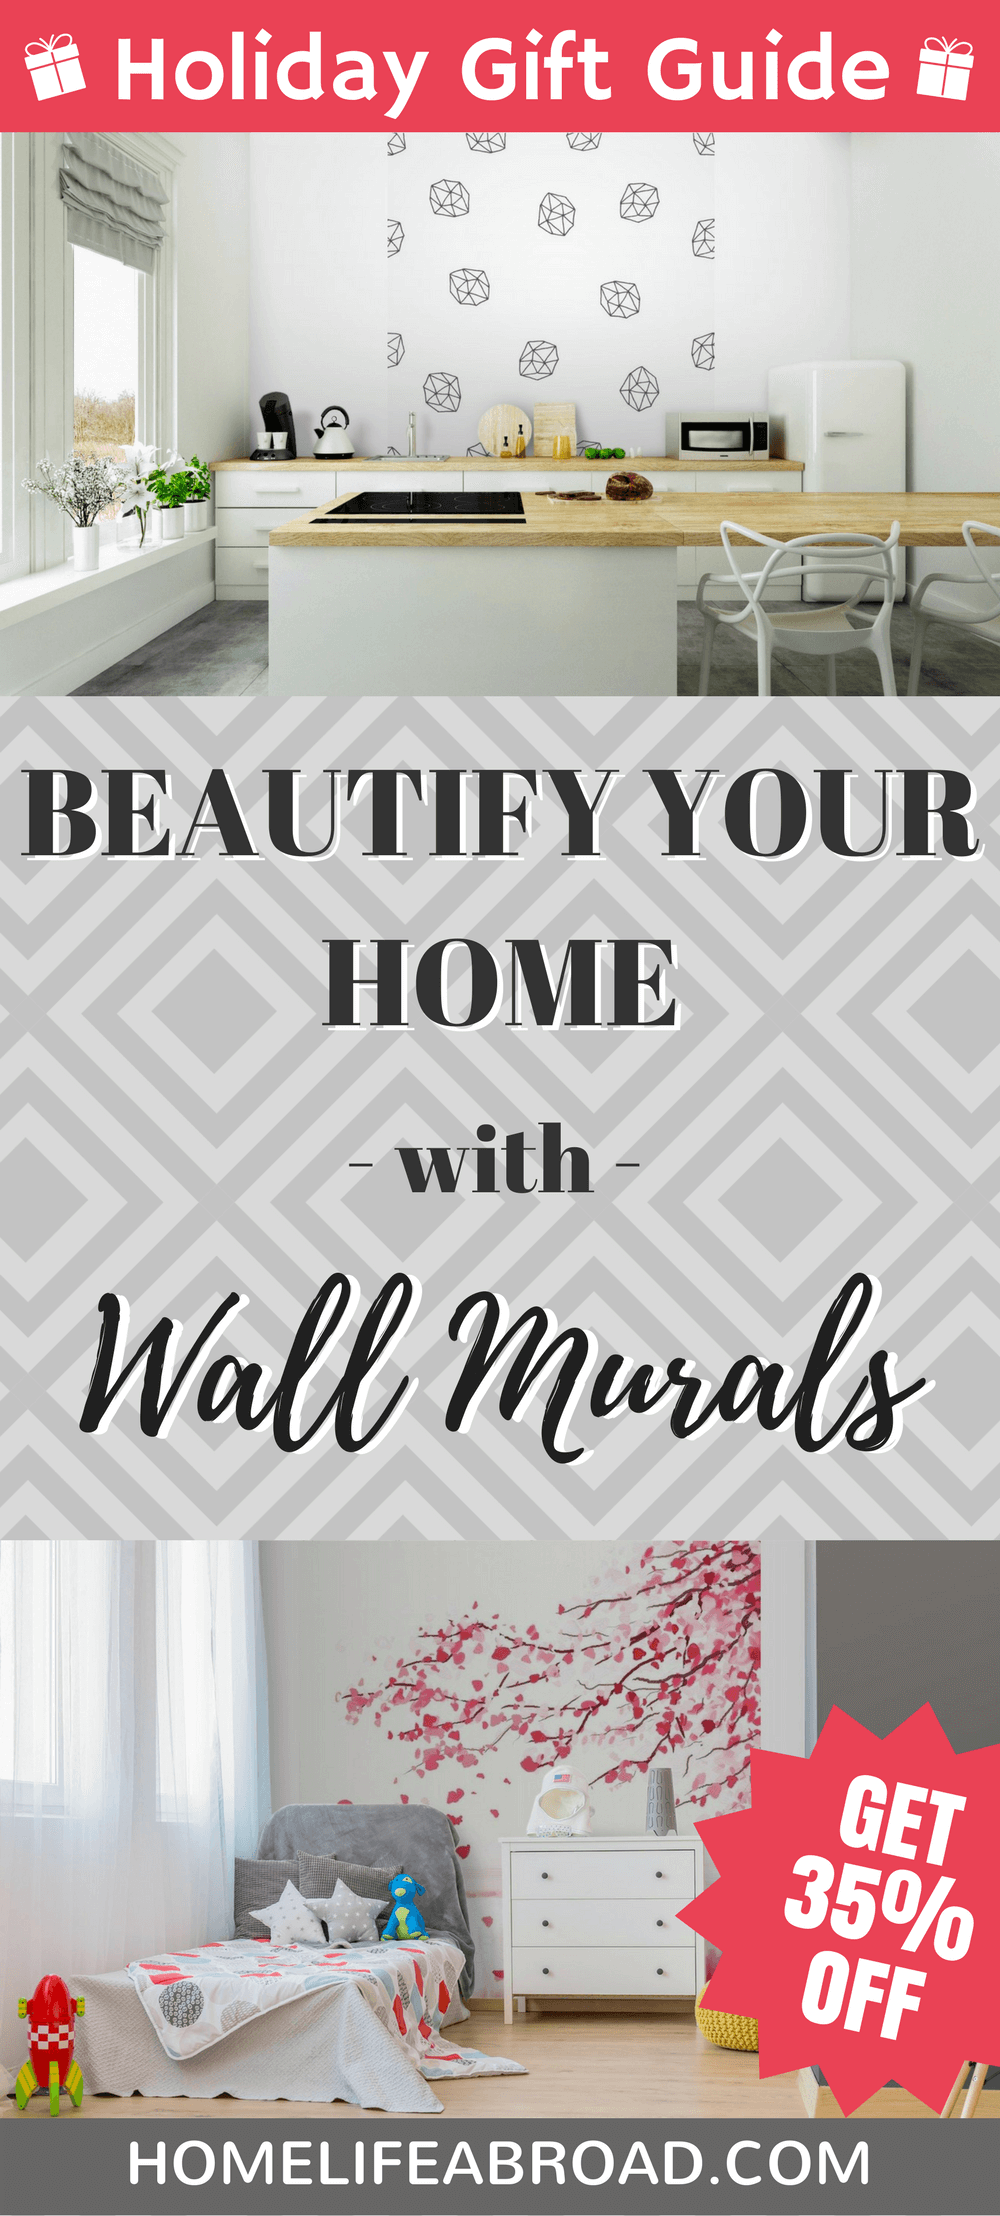 Interior design made easy! Wall murals from Pixers are not only gorgeous, they can be reused up to TEN times. Plus, check out our tip to get 35% off your first order. #interiordesign #homedesign #wallmurals #walldecals #wallpapers #giftguide #giftidea #giftideas